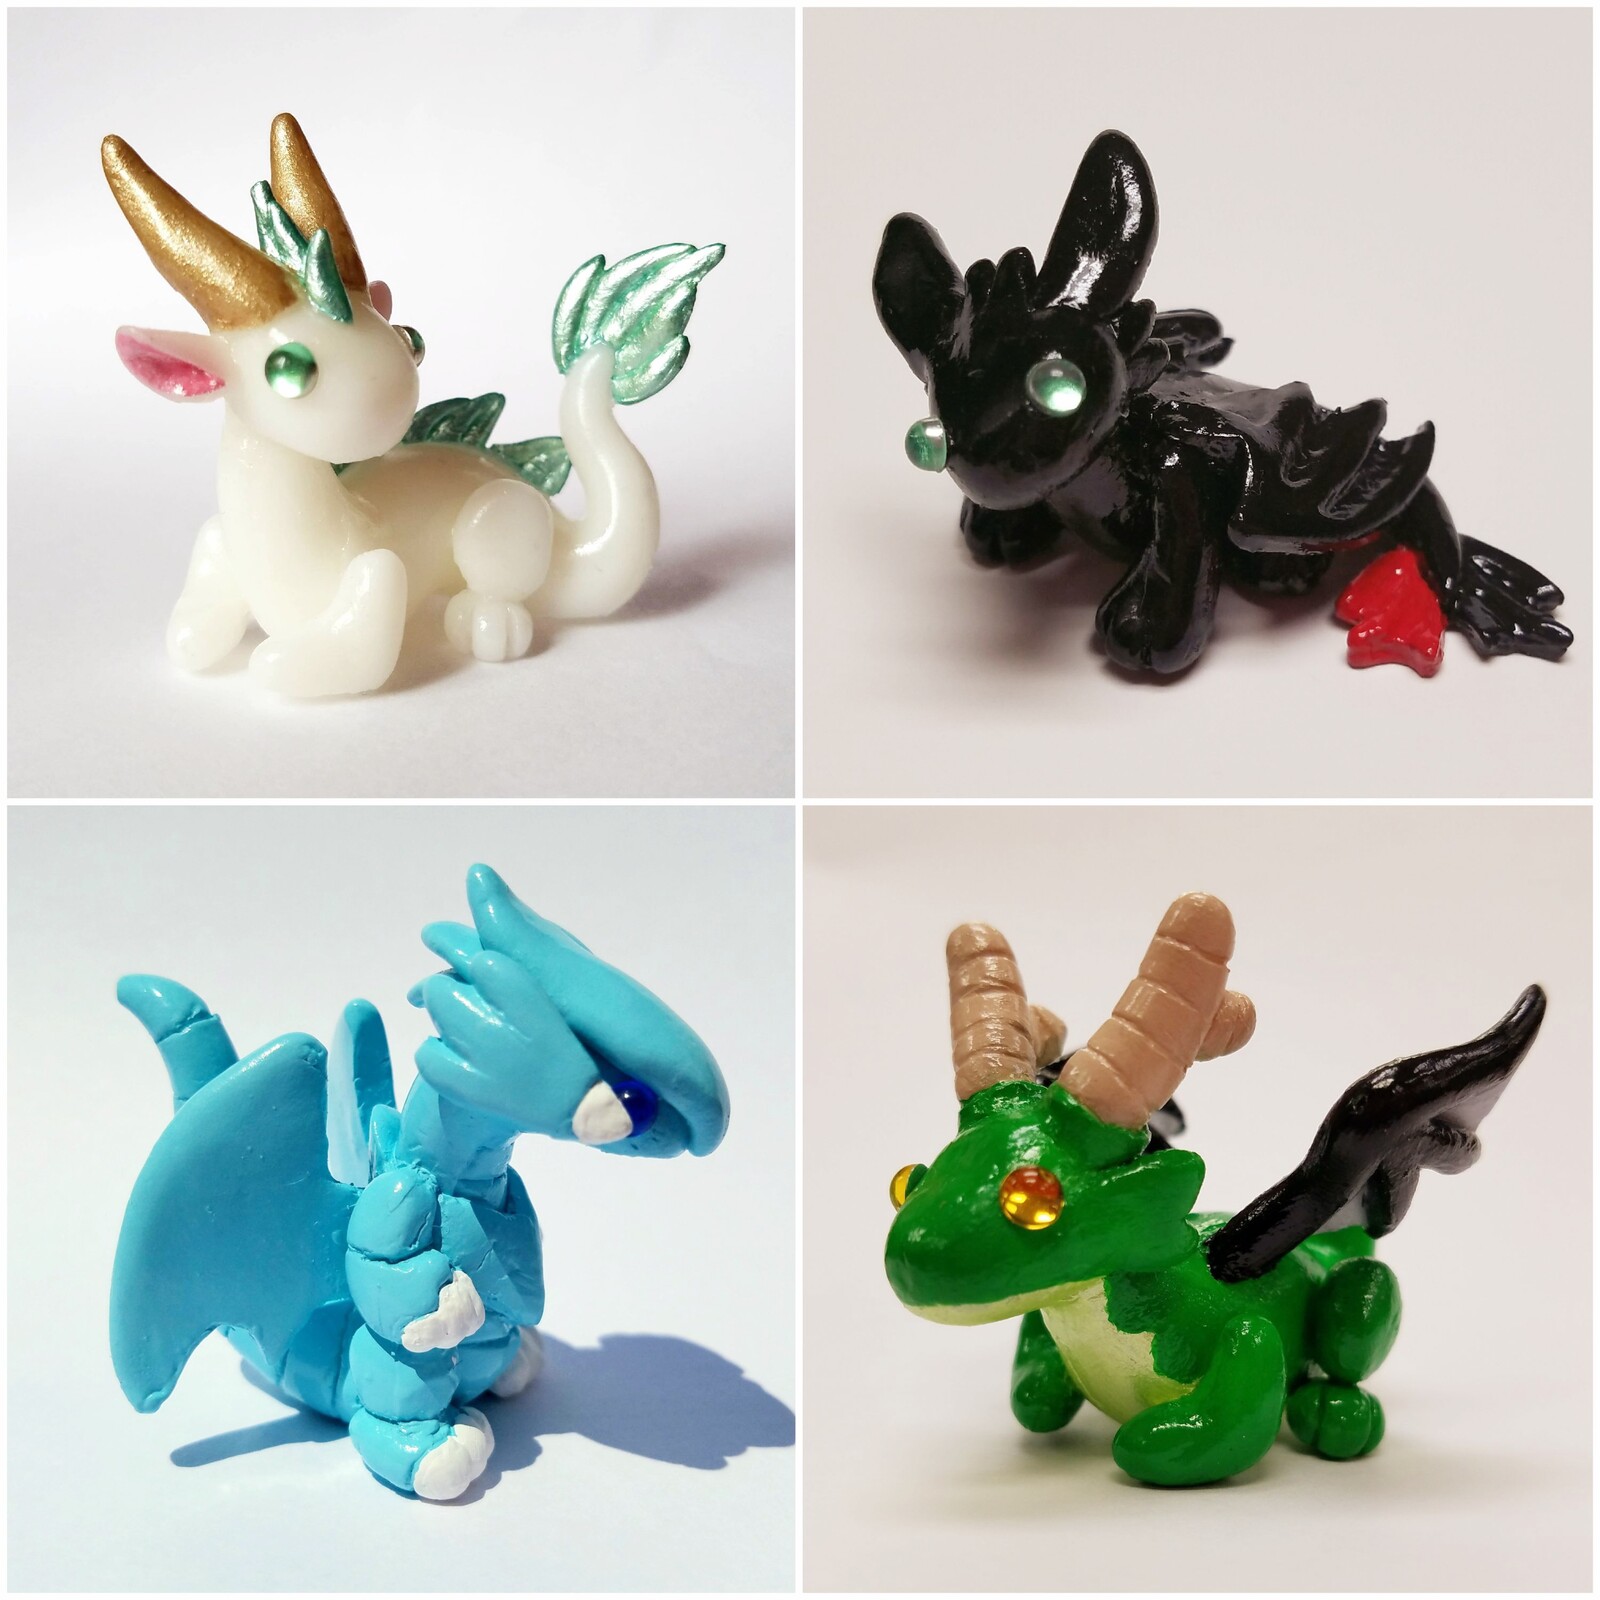 Fanart dwagon figures of Haku, Toothless, Blue Eyes White Dragon, and Tohru. Roughly 1.5-2 inch resin cast with hand painted details. 